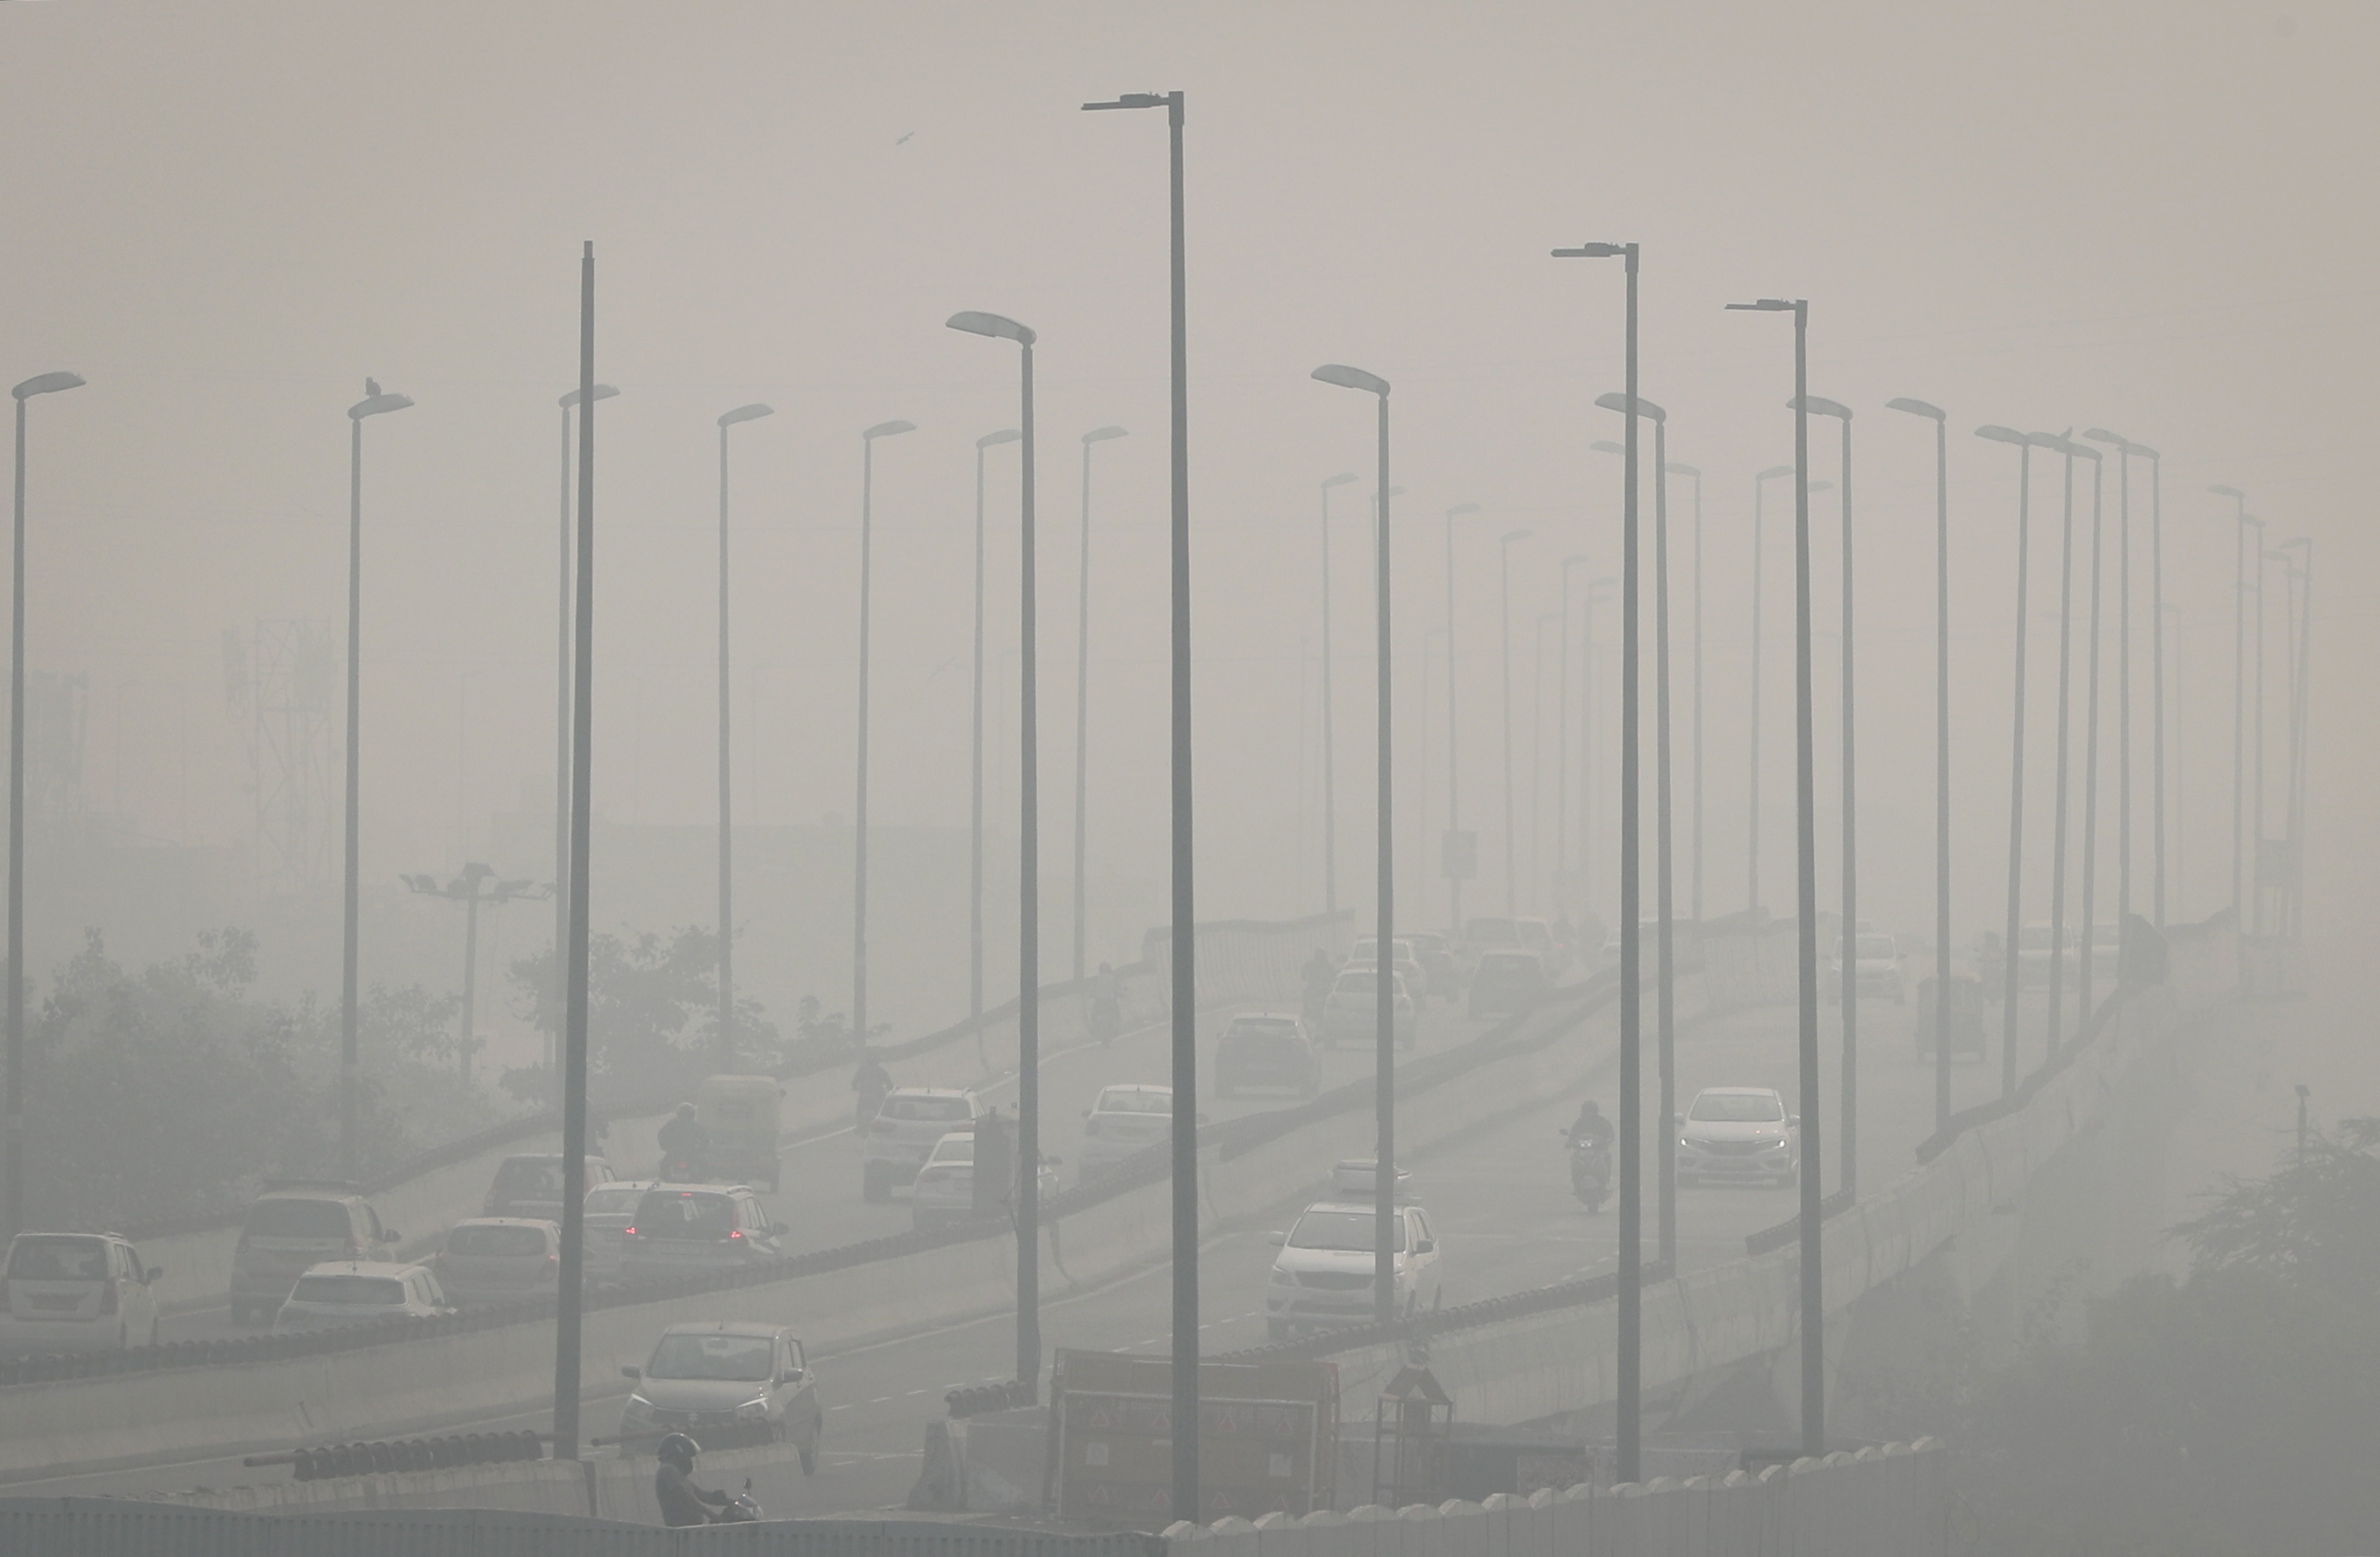 Traffic moves on a flyover on a smoggy morning in New Delhi, India, November 4, 2021. REUTERS/Adnan Abidi